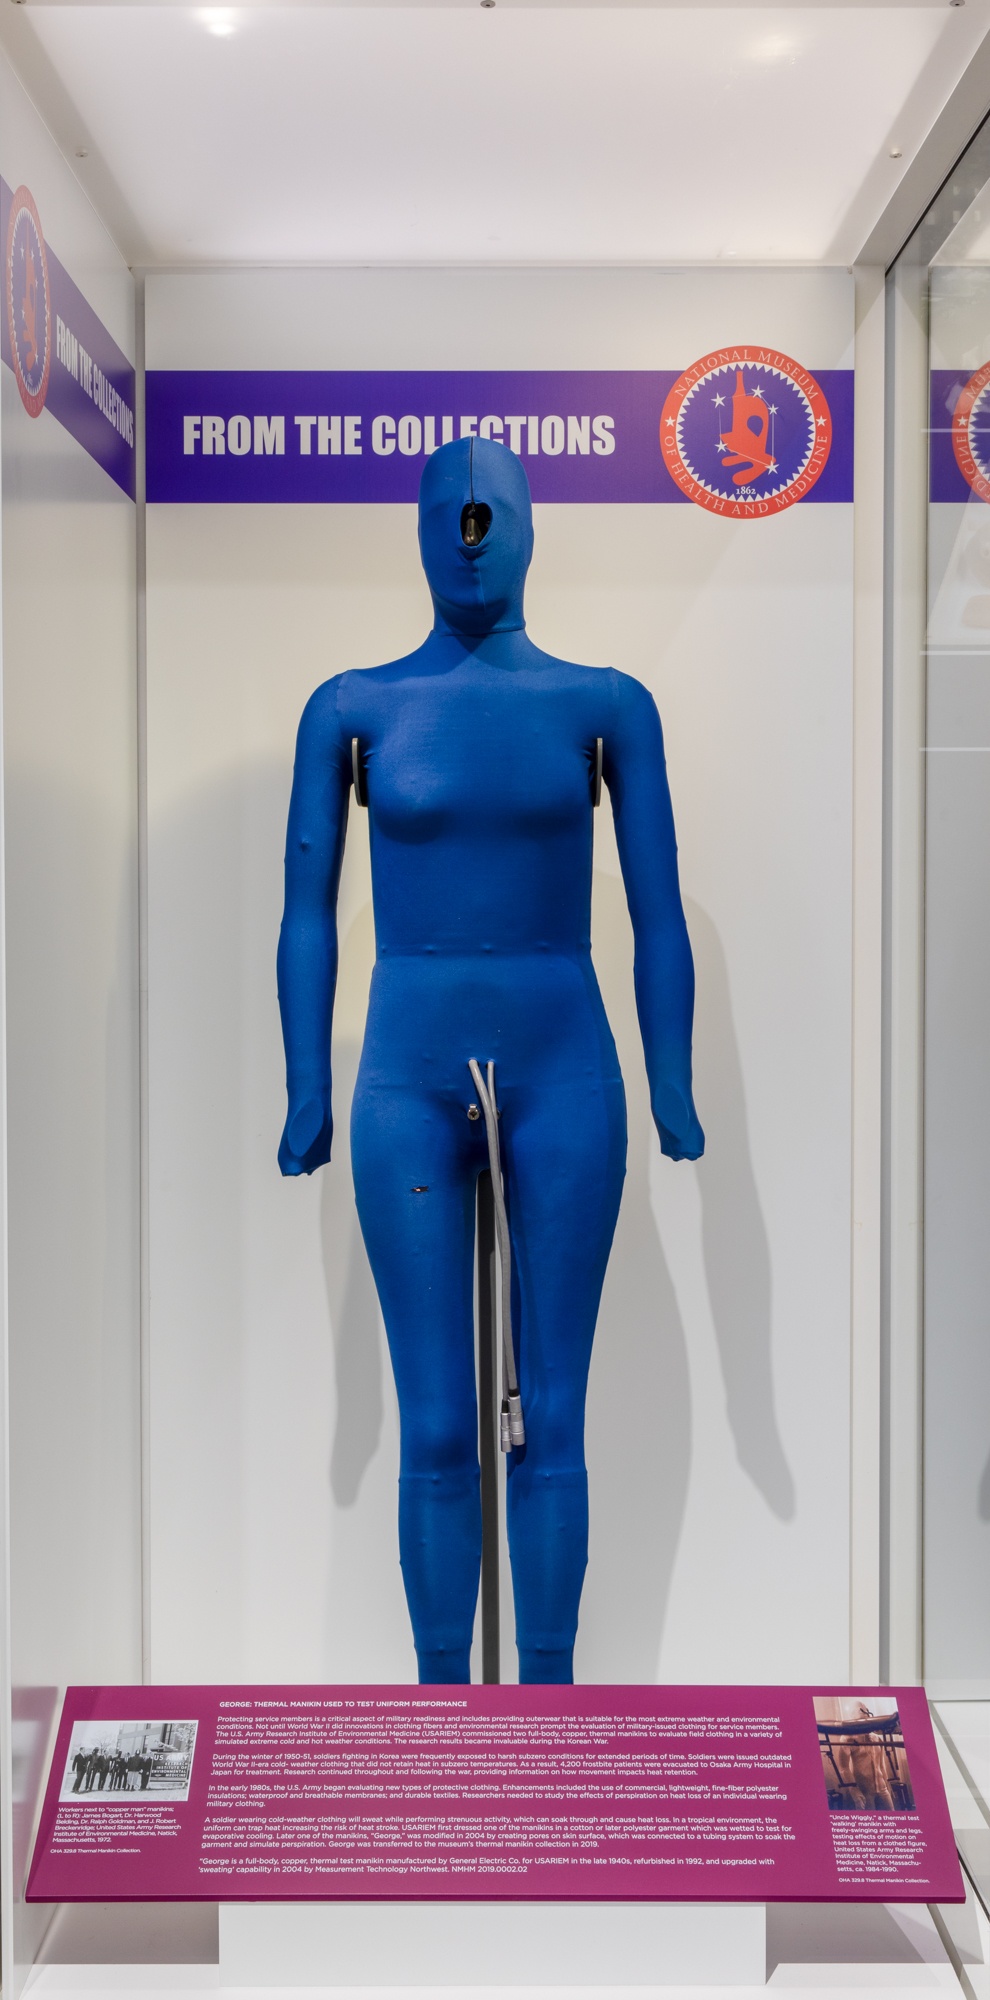 “From the Collections of the National Museum of Health and Medicine: George, Therman Mannikin Used to Test Uniform Performance” Exhibit